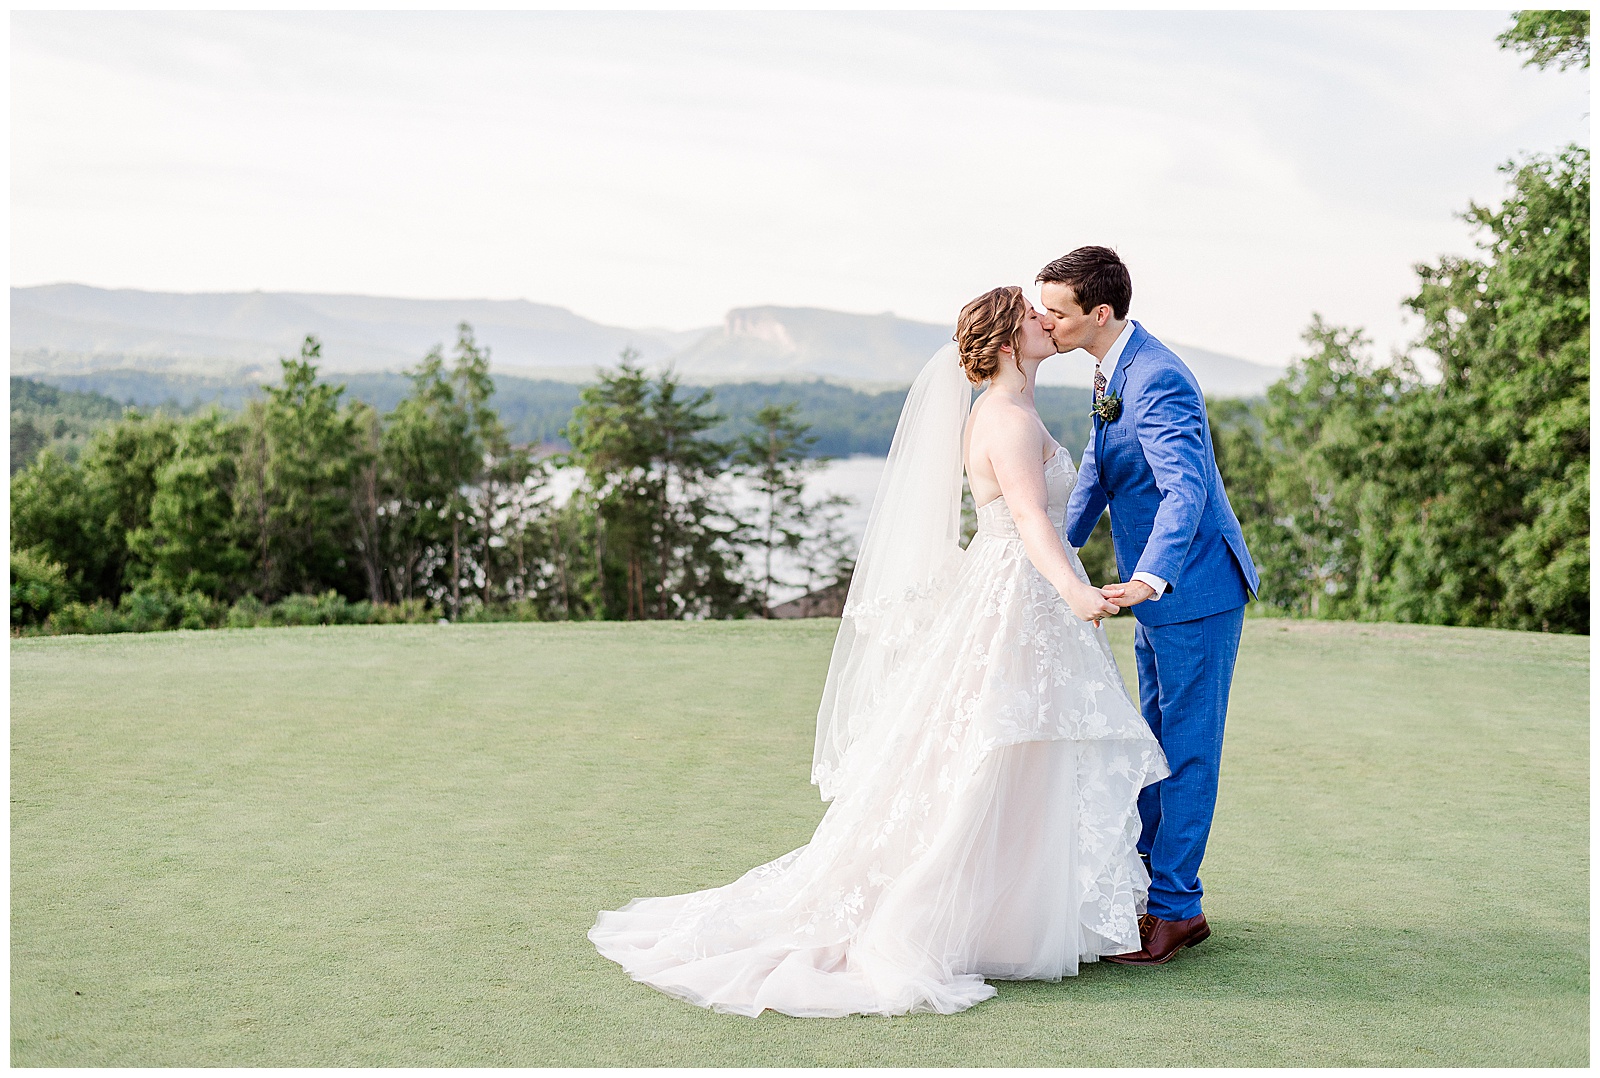 Stunning outdoor mountain photos of Bride and Groom from Outdoorsy Summer Wedding at North Carolina Lakehouse | check out the full wedding at KevynDixonPhoto.com